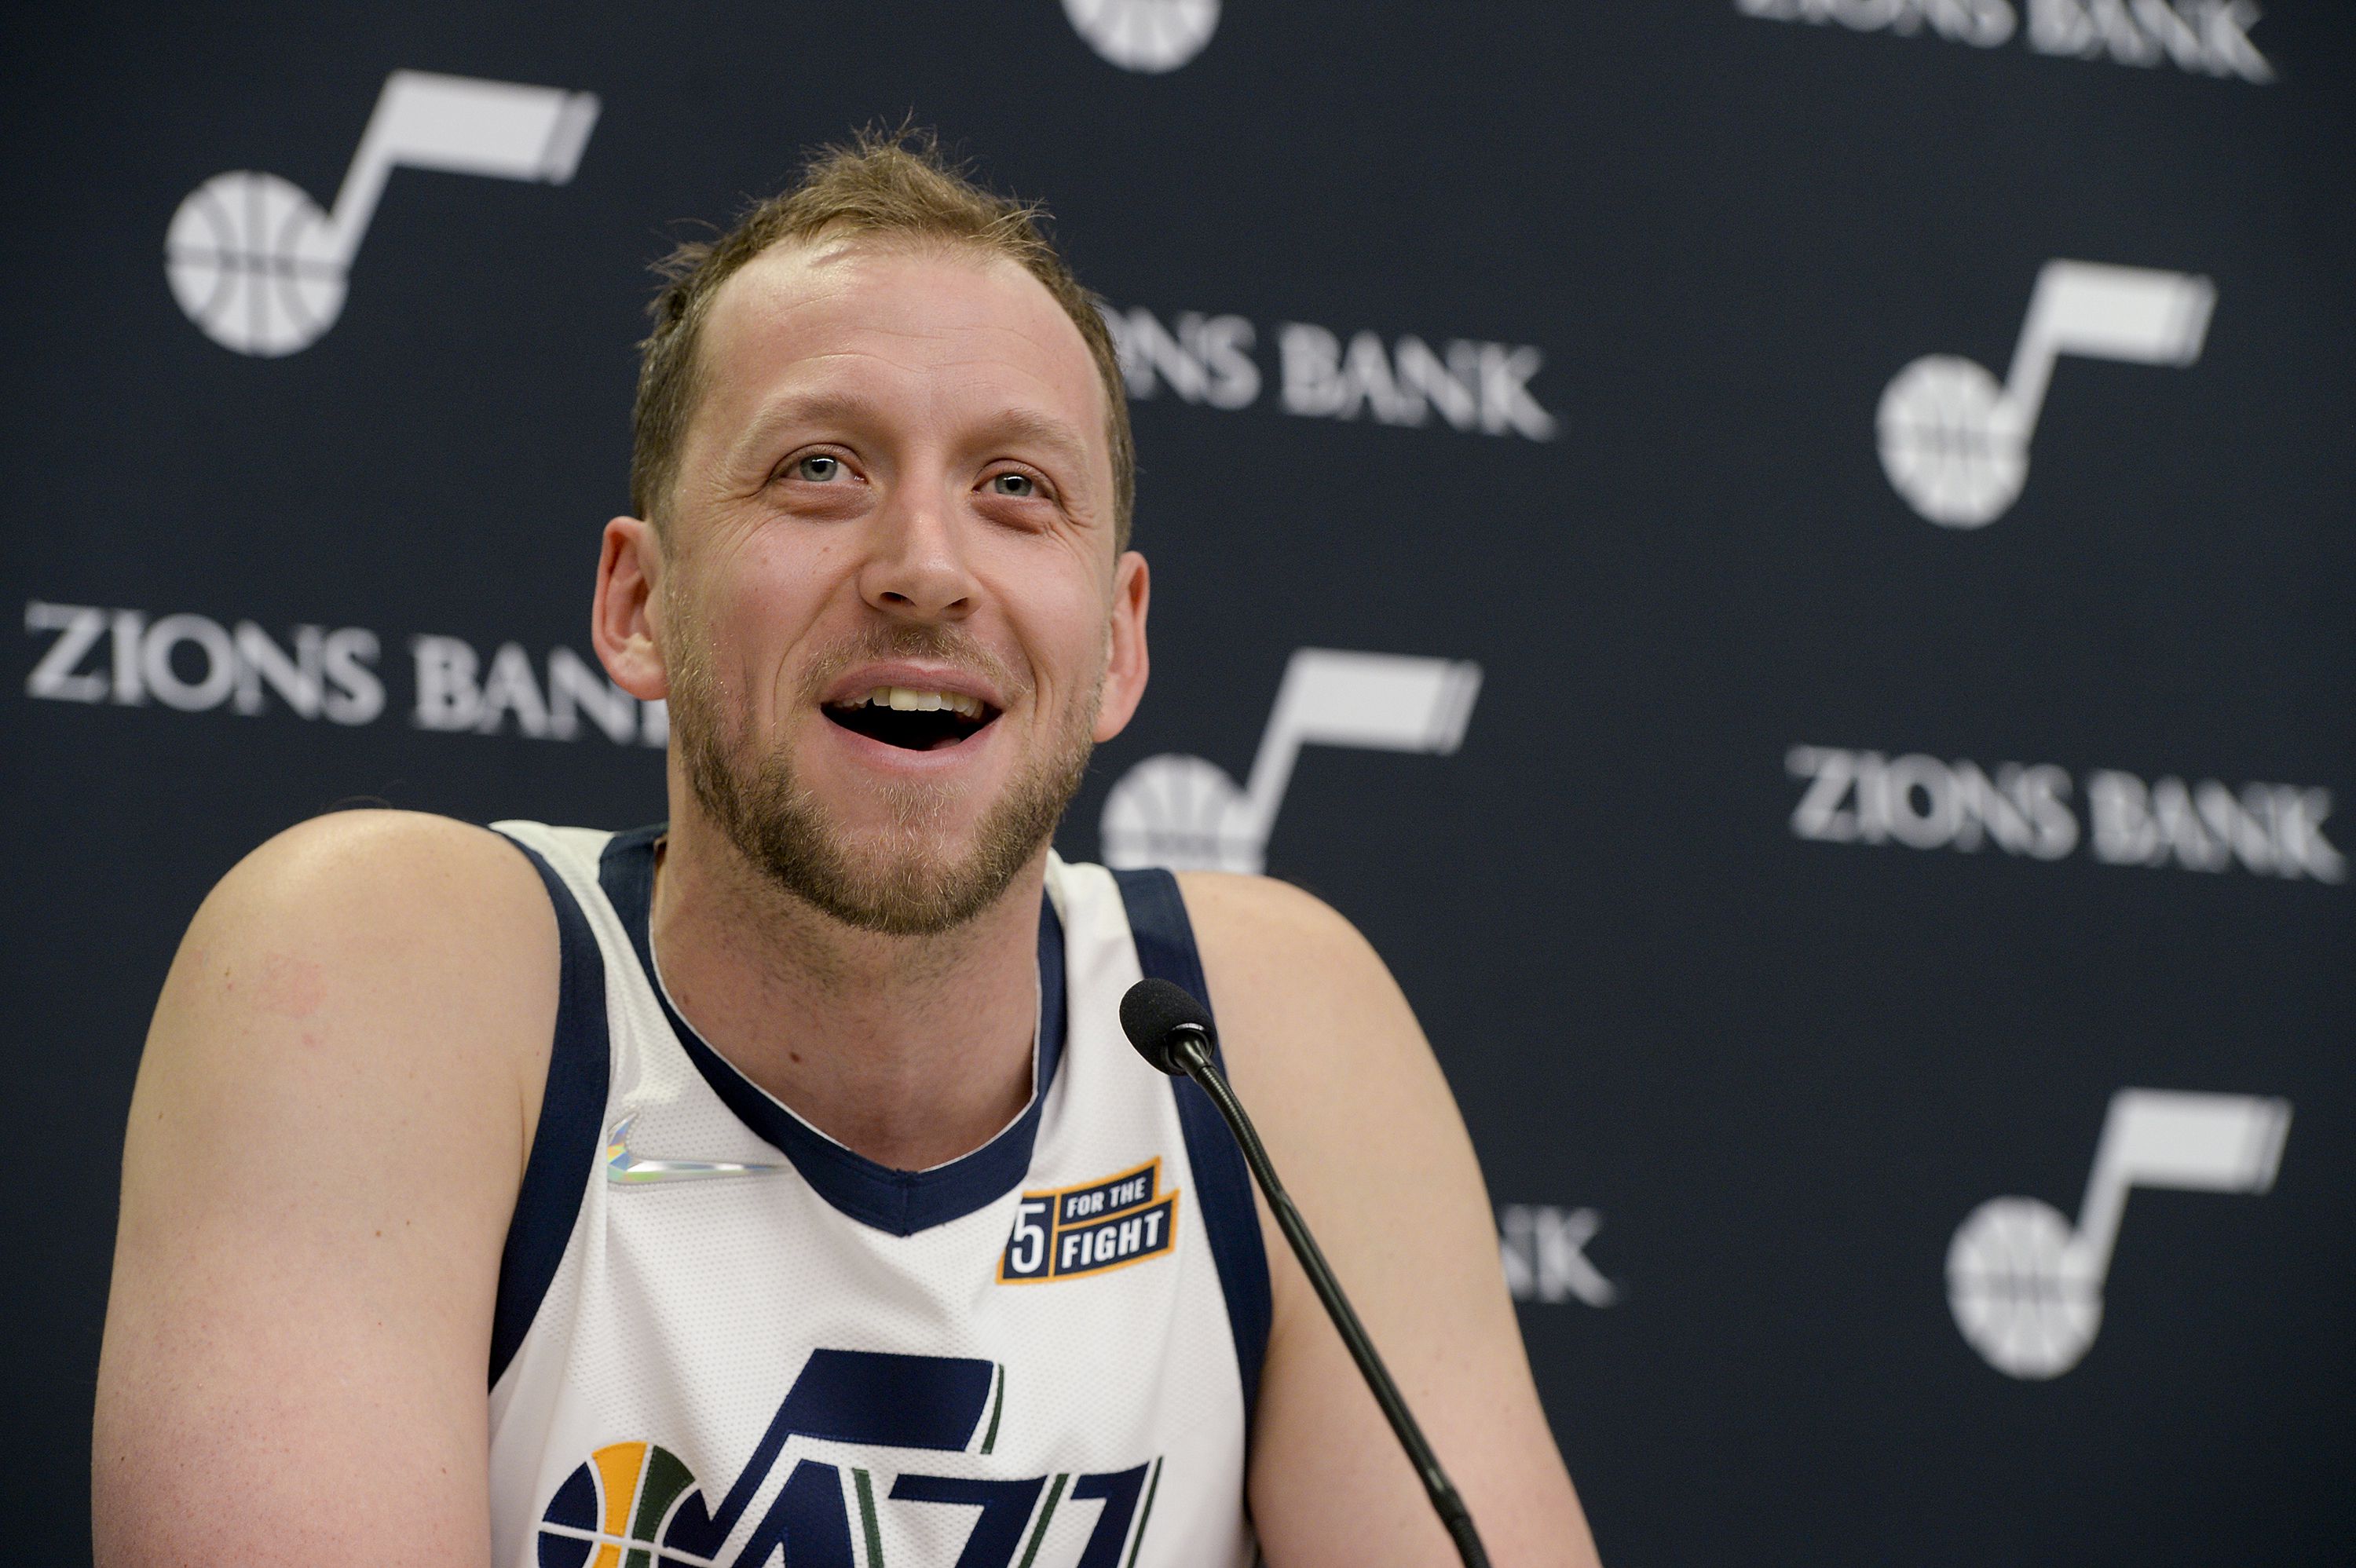 Donovan Mitchell and Joe Ingles will play for bragging rights in